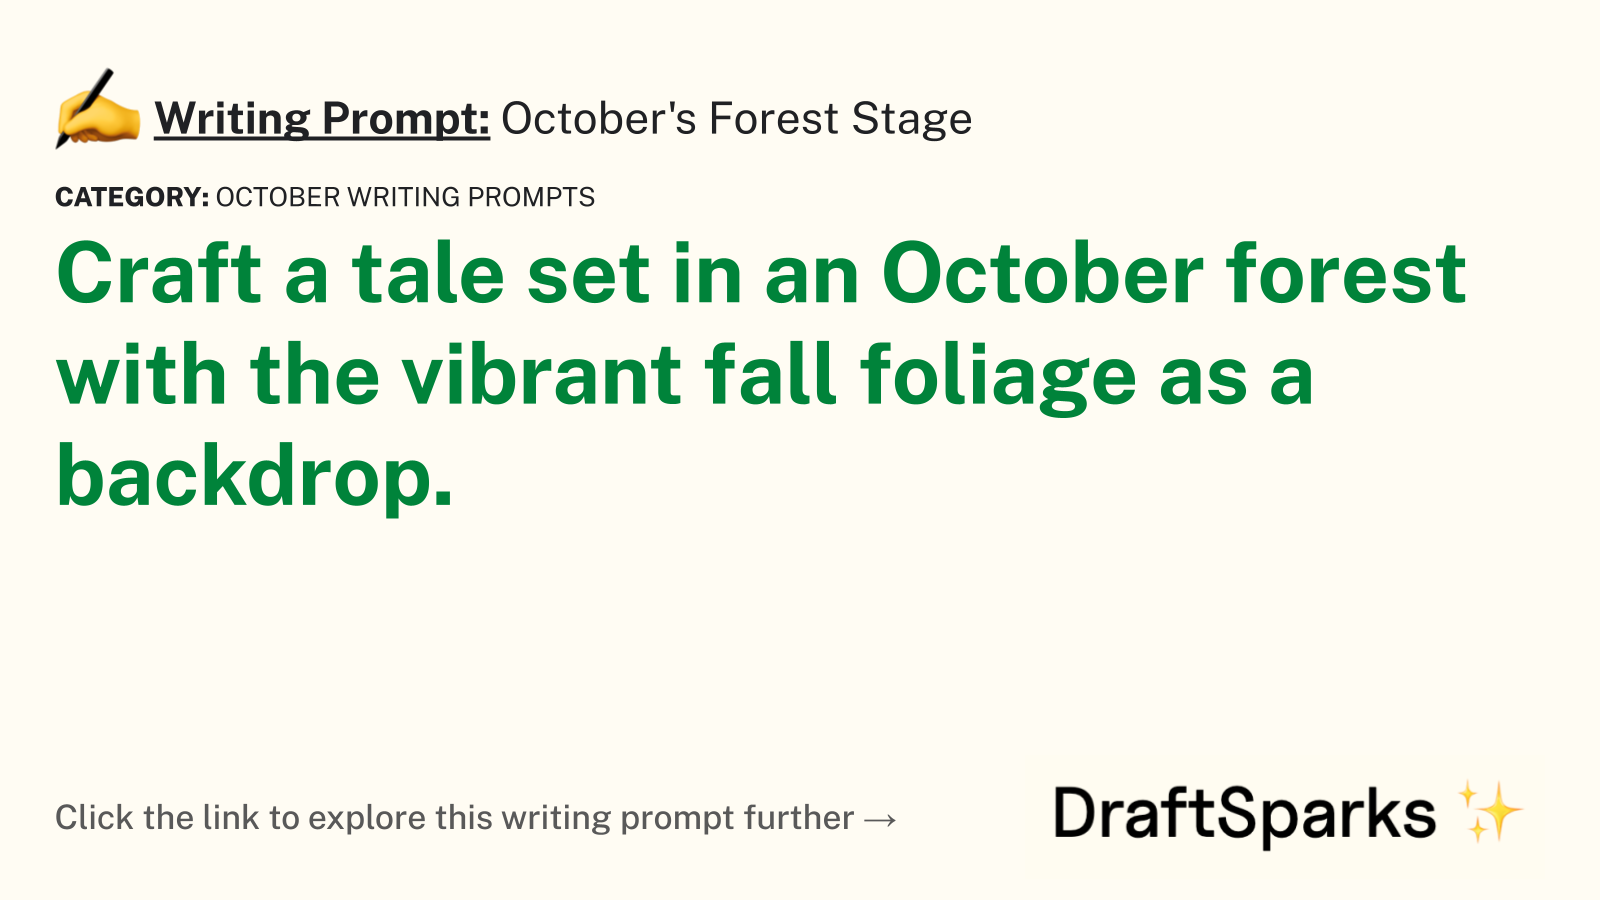 October’s Forest Stage